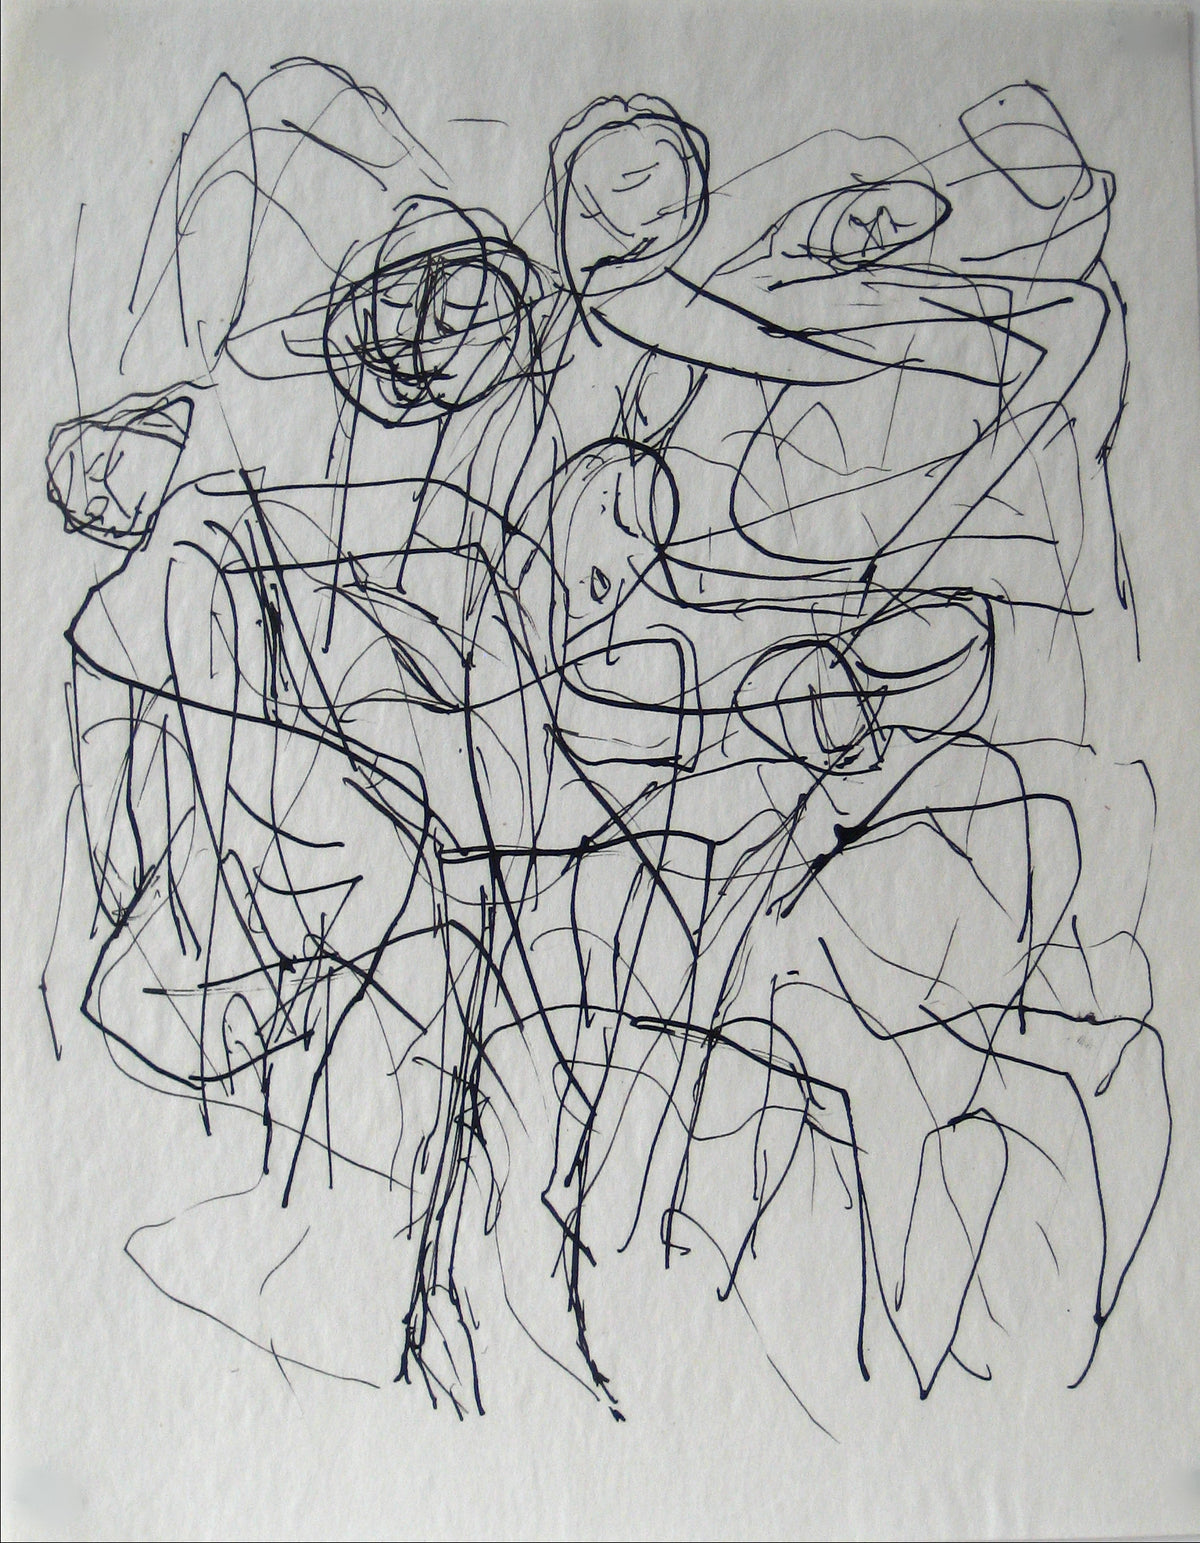 Abstracted Figures in a Scene &lt;br&gt;Early 20th Century Ink on Paper &lt;br&gt;&lt;br&gt;#13602